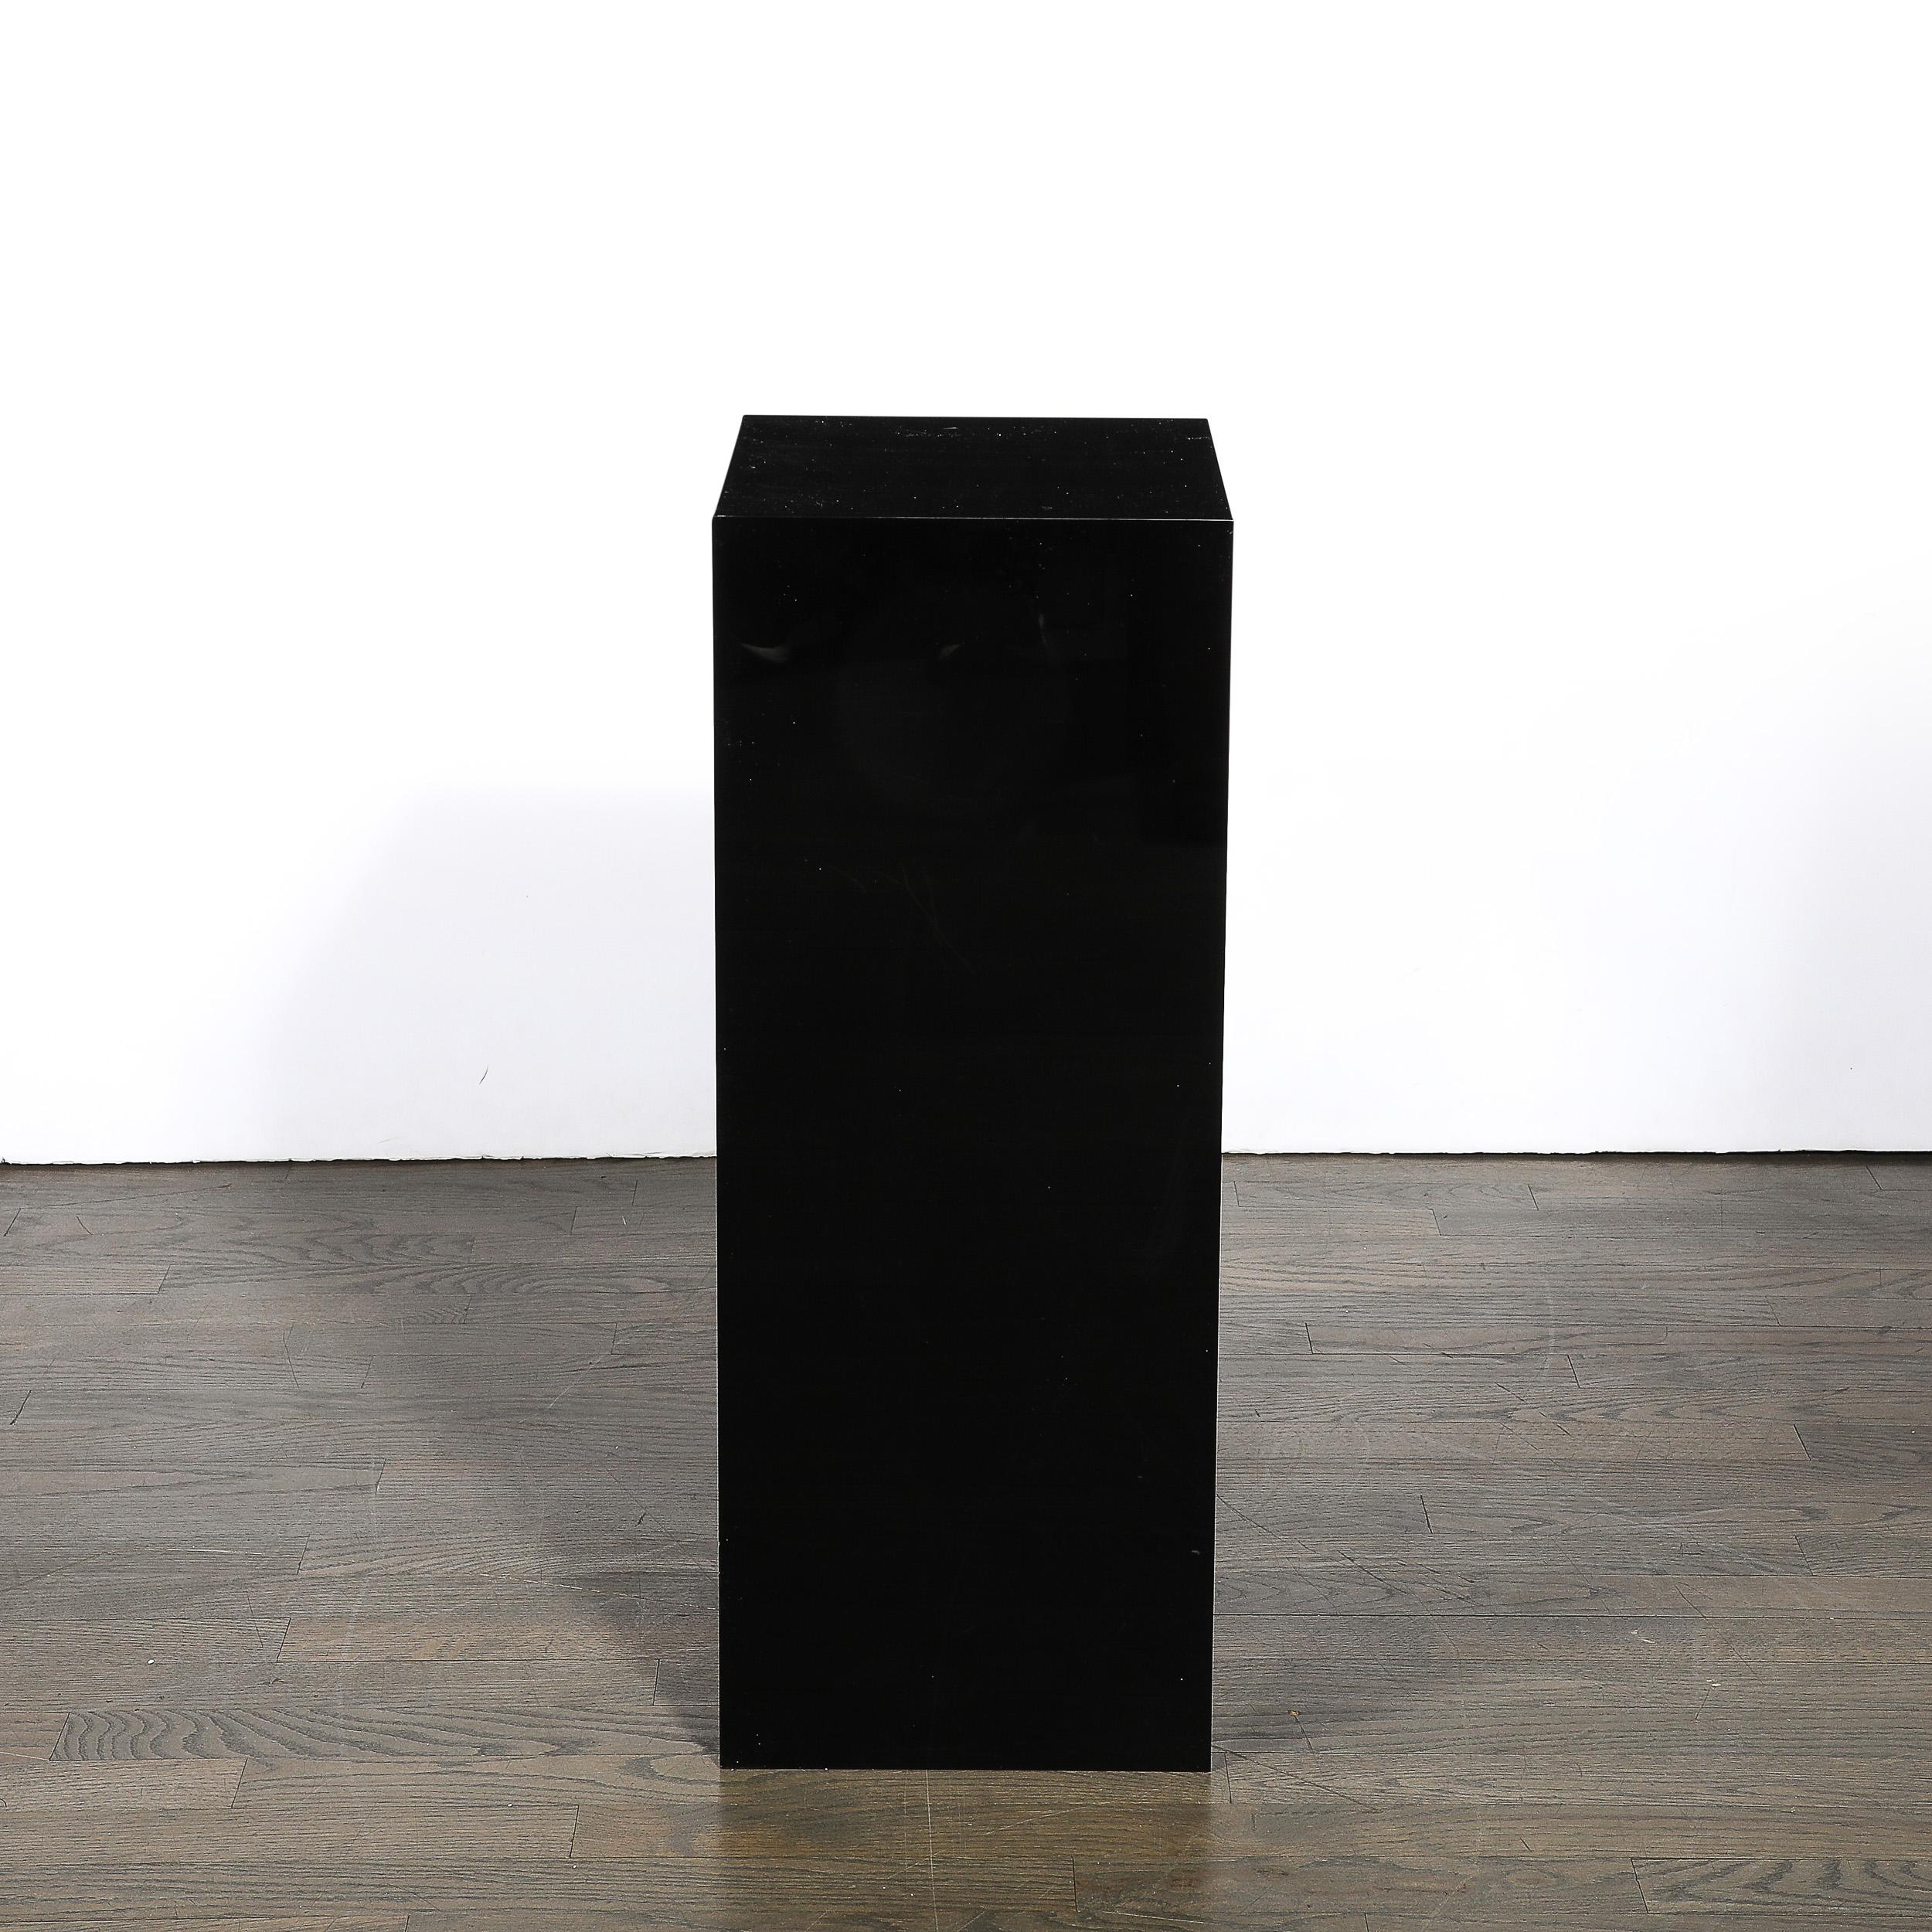 This minimal and materially excellent Mid-Century Modernist Rectilinear Black Acrylic Pedestal originates from the United States during the latter half of the 20th Century. Features a rectilinear composition in gleaming Black Acrylic, a durable and